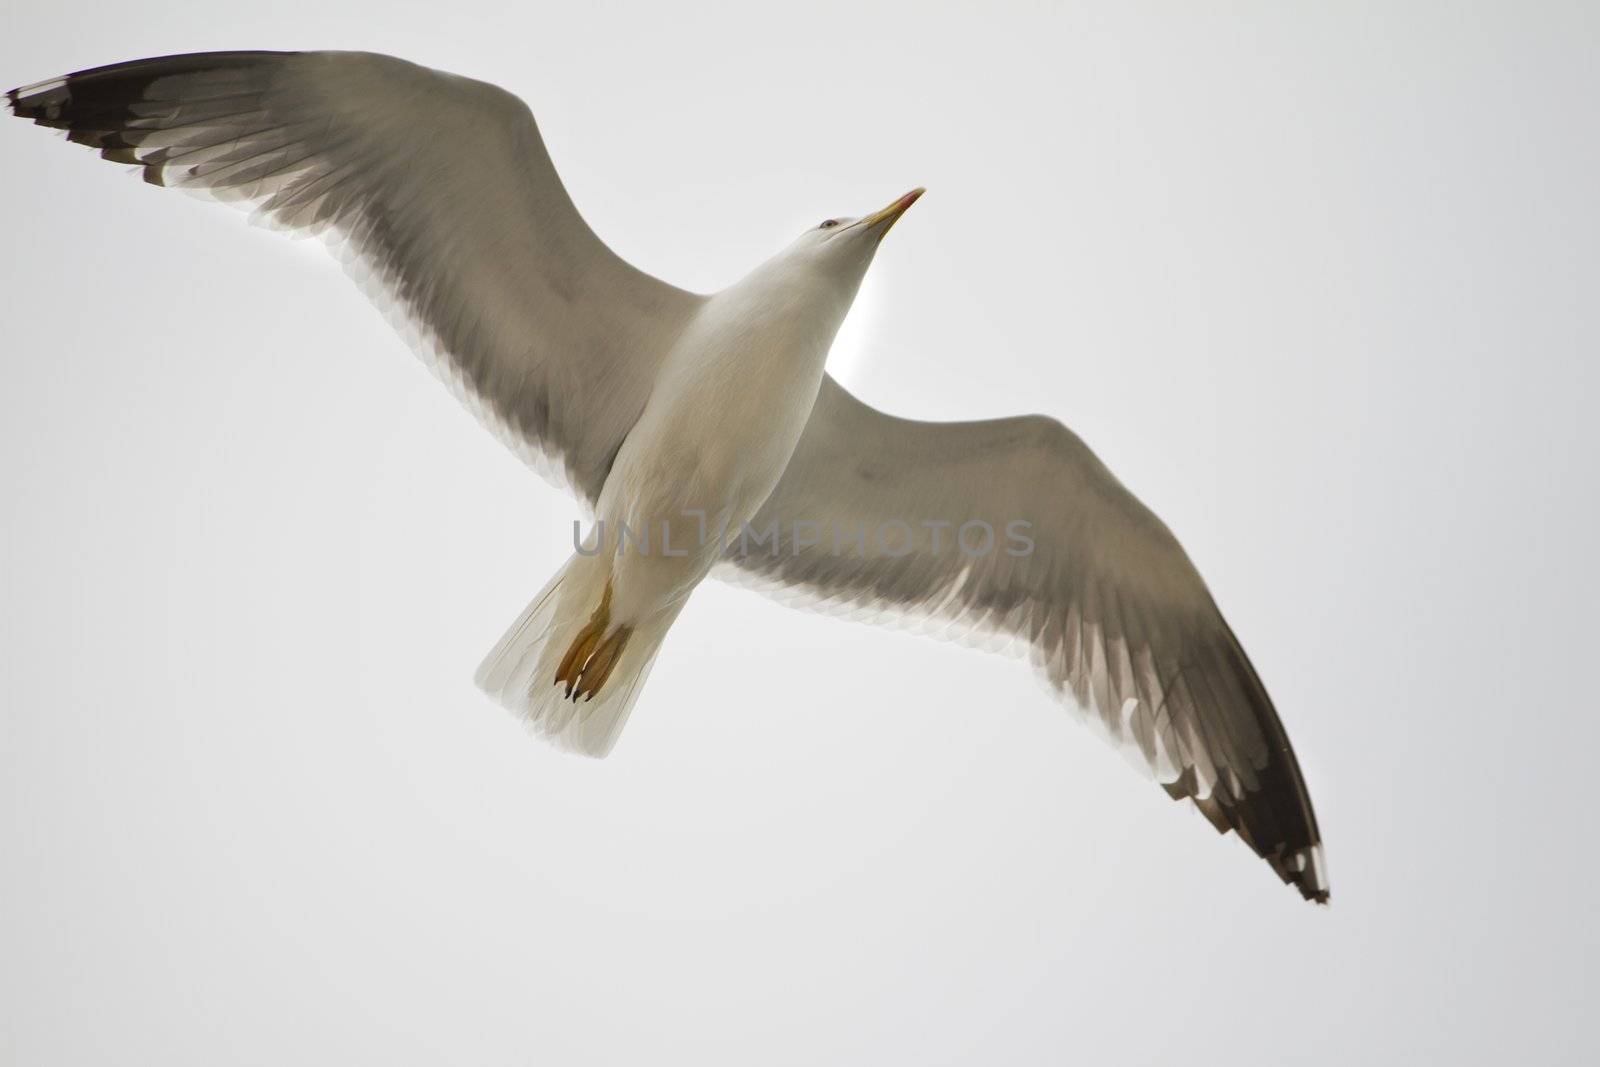 View from below a white seagull in plain flight.